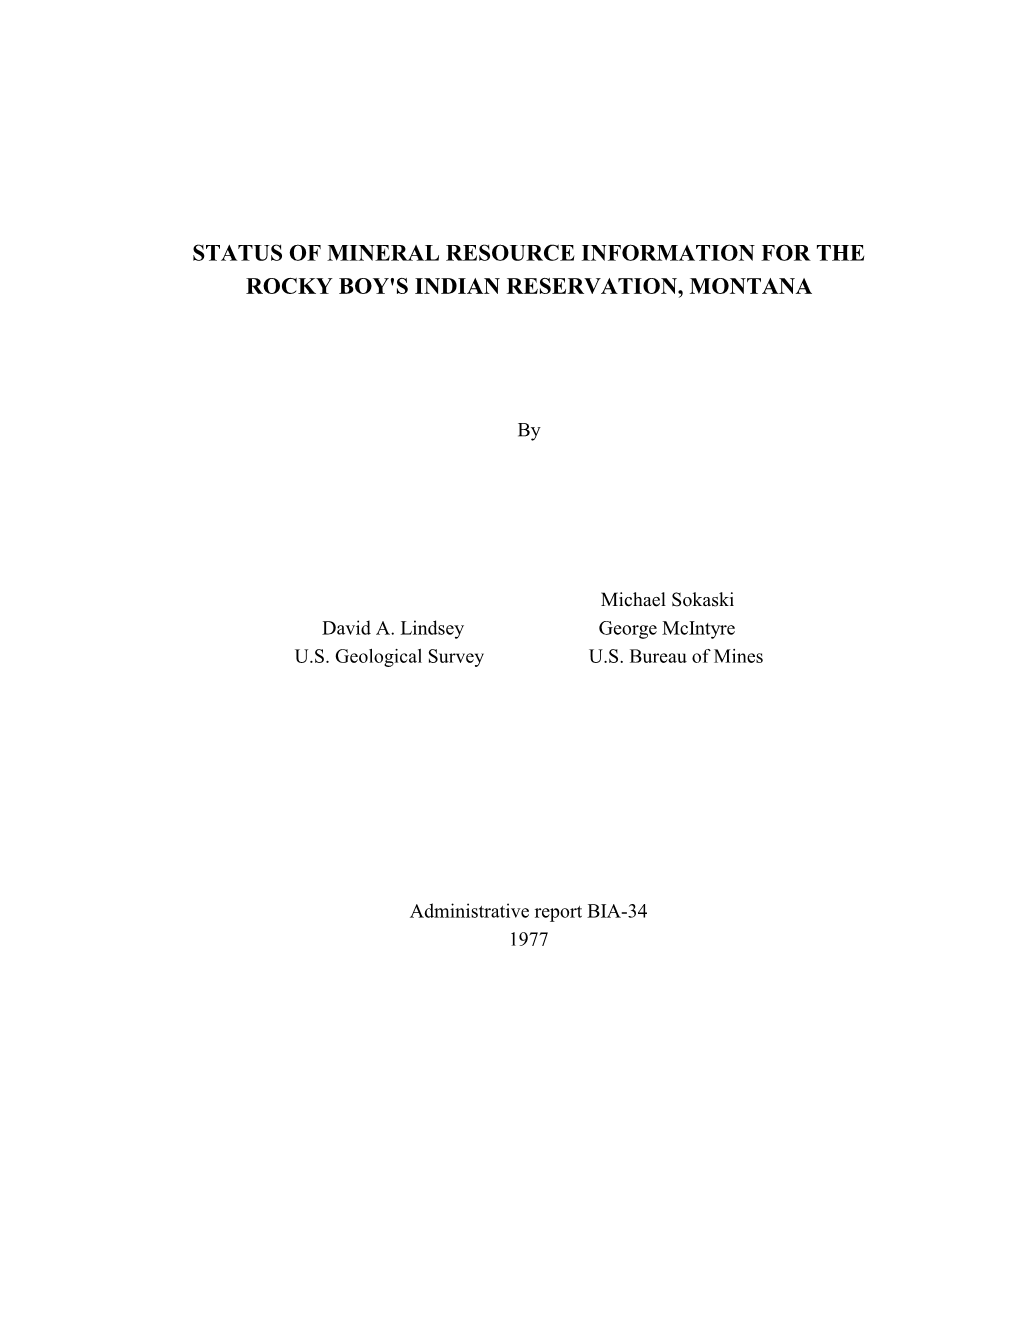 Status of Mineral Resource Information for the Rocky Boy's Indian Reservation, Montana